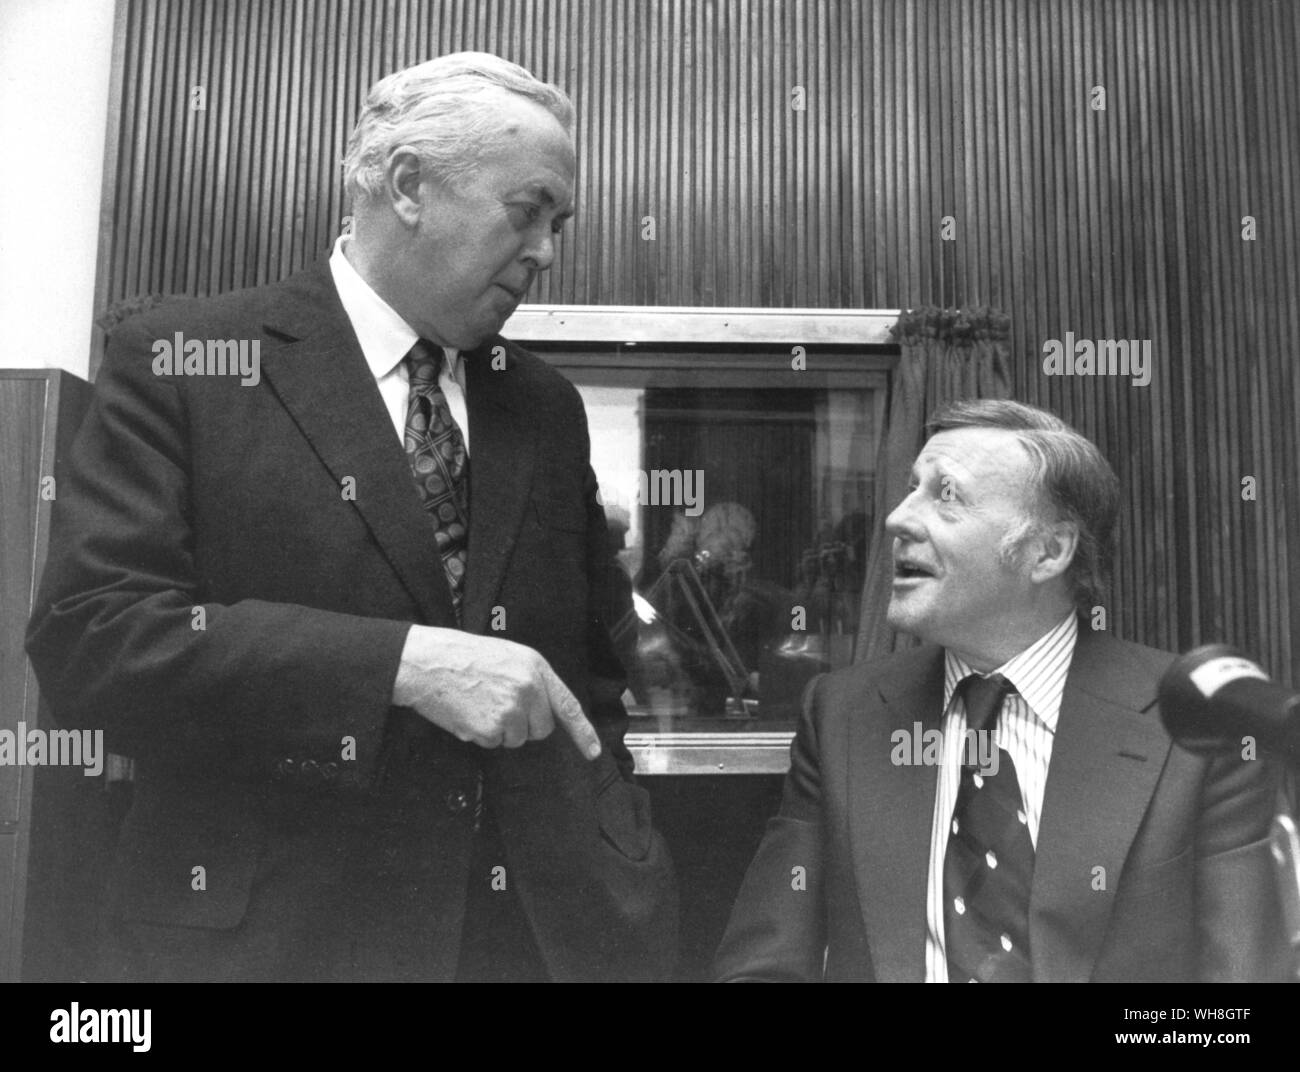 Jimmy Young with Sir Harold Wilson (right). The former Labour Prime Minister is a guest on Jimmy Young's BBC Radio 2 programme, at Broadcasting House 1976.. . . Stock Photo